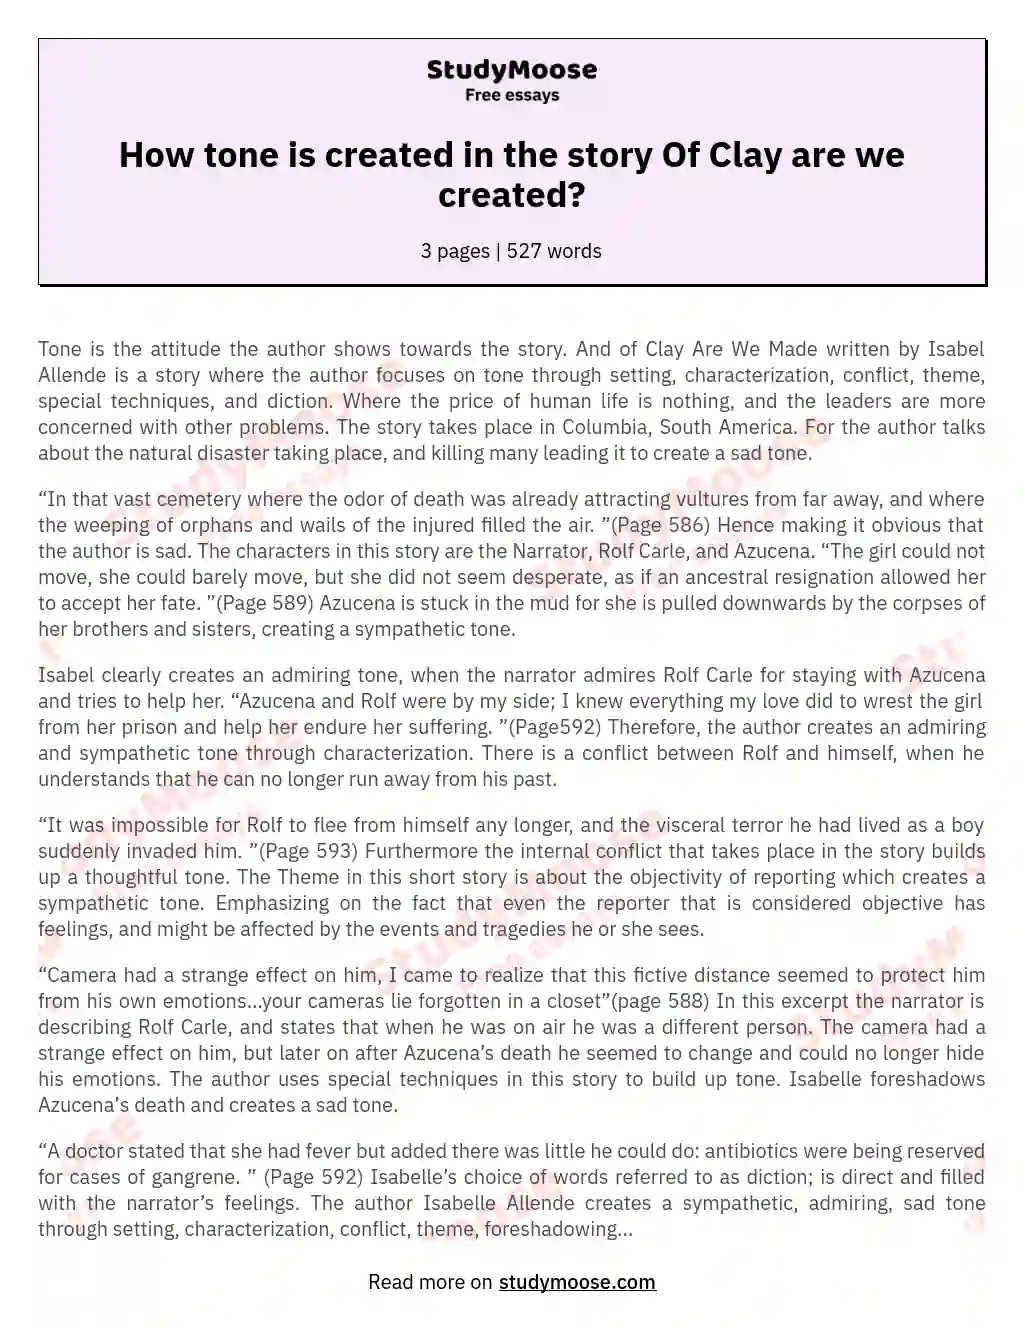 How tone is created in the story Of Clay are we created? essay